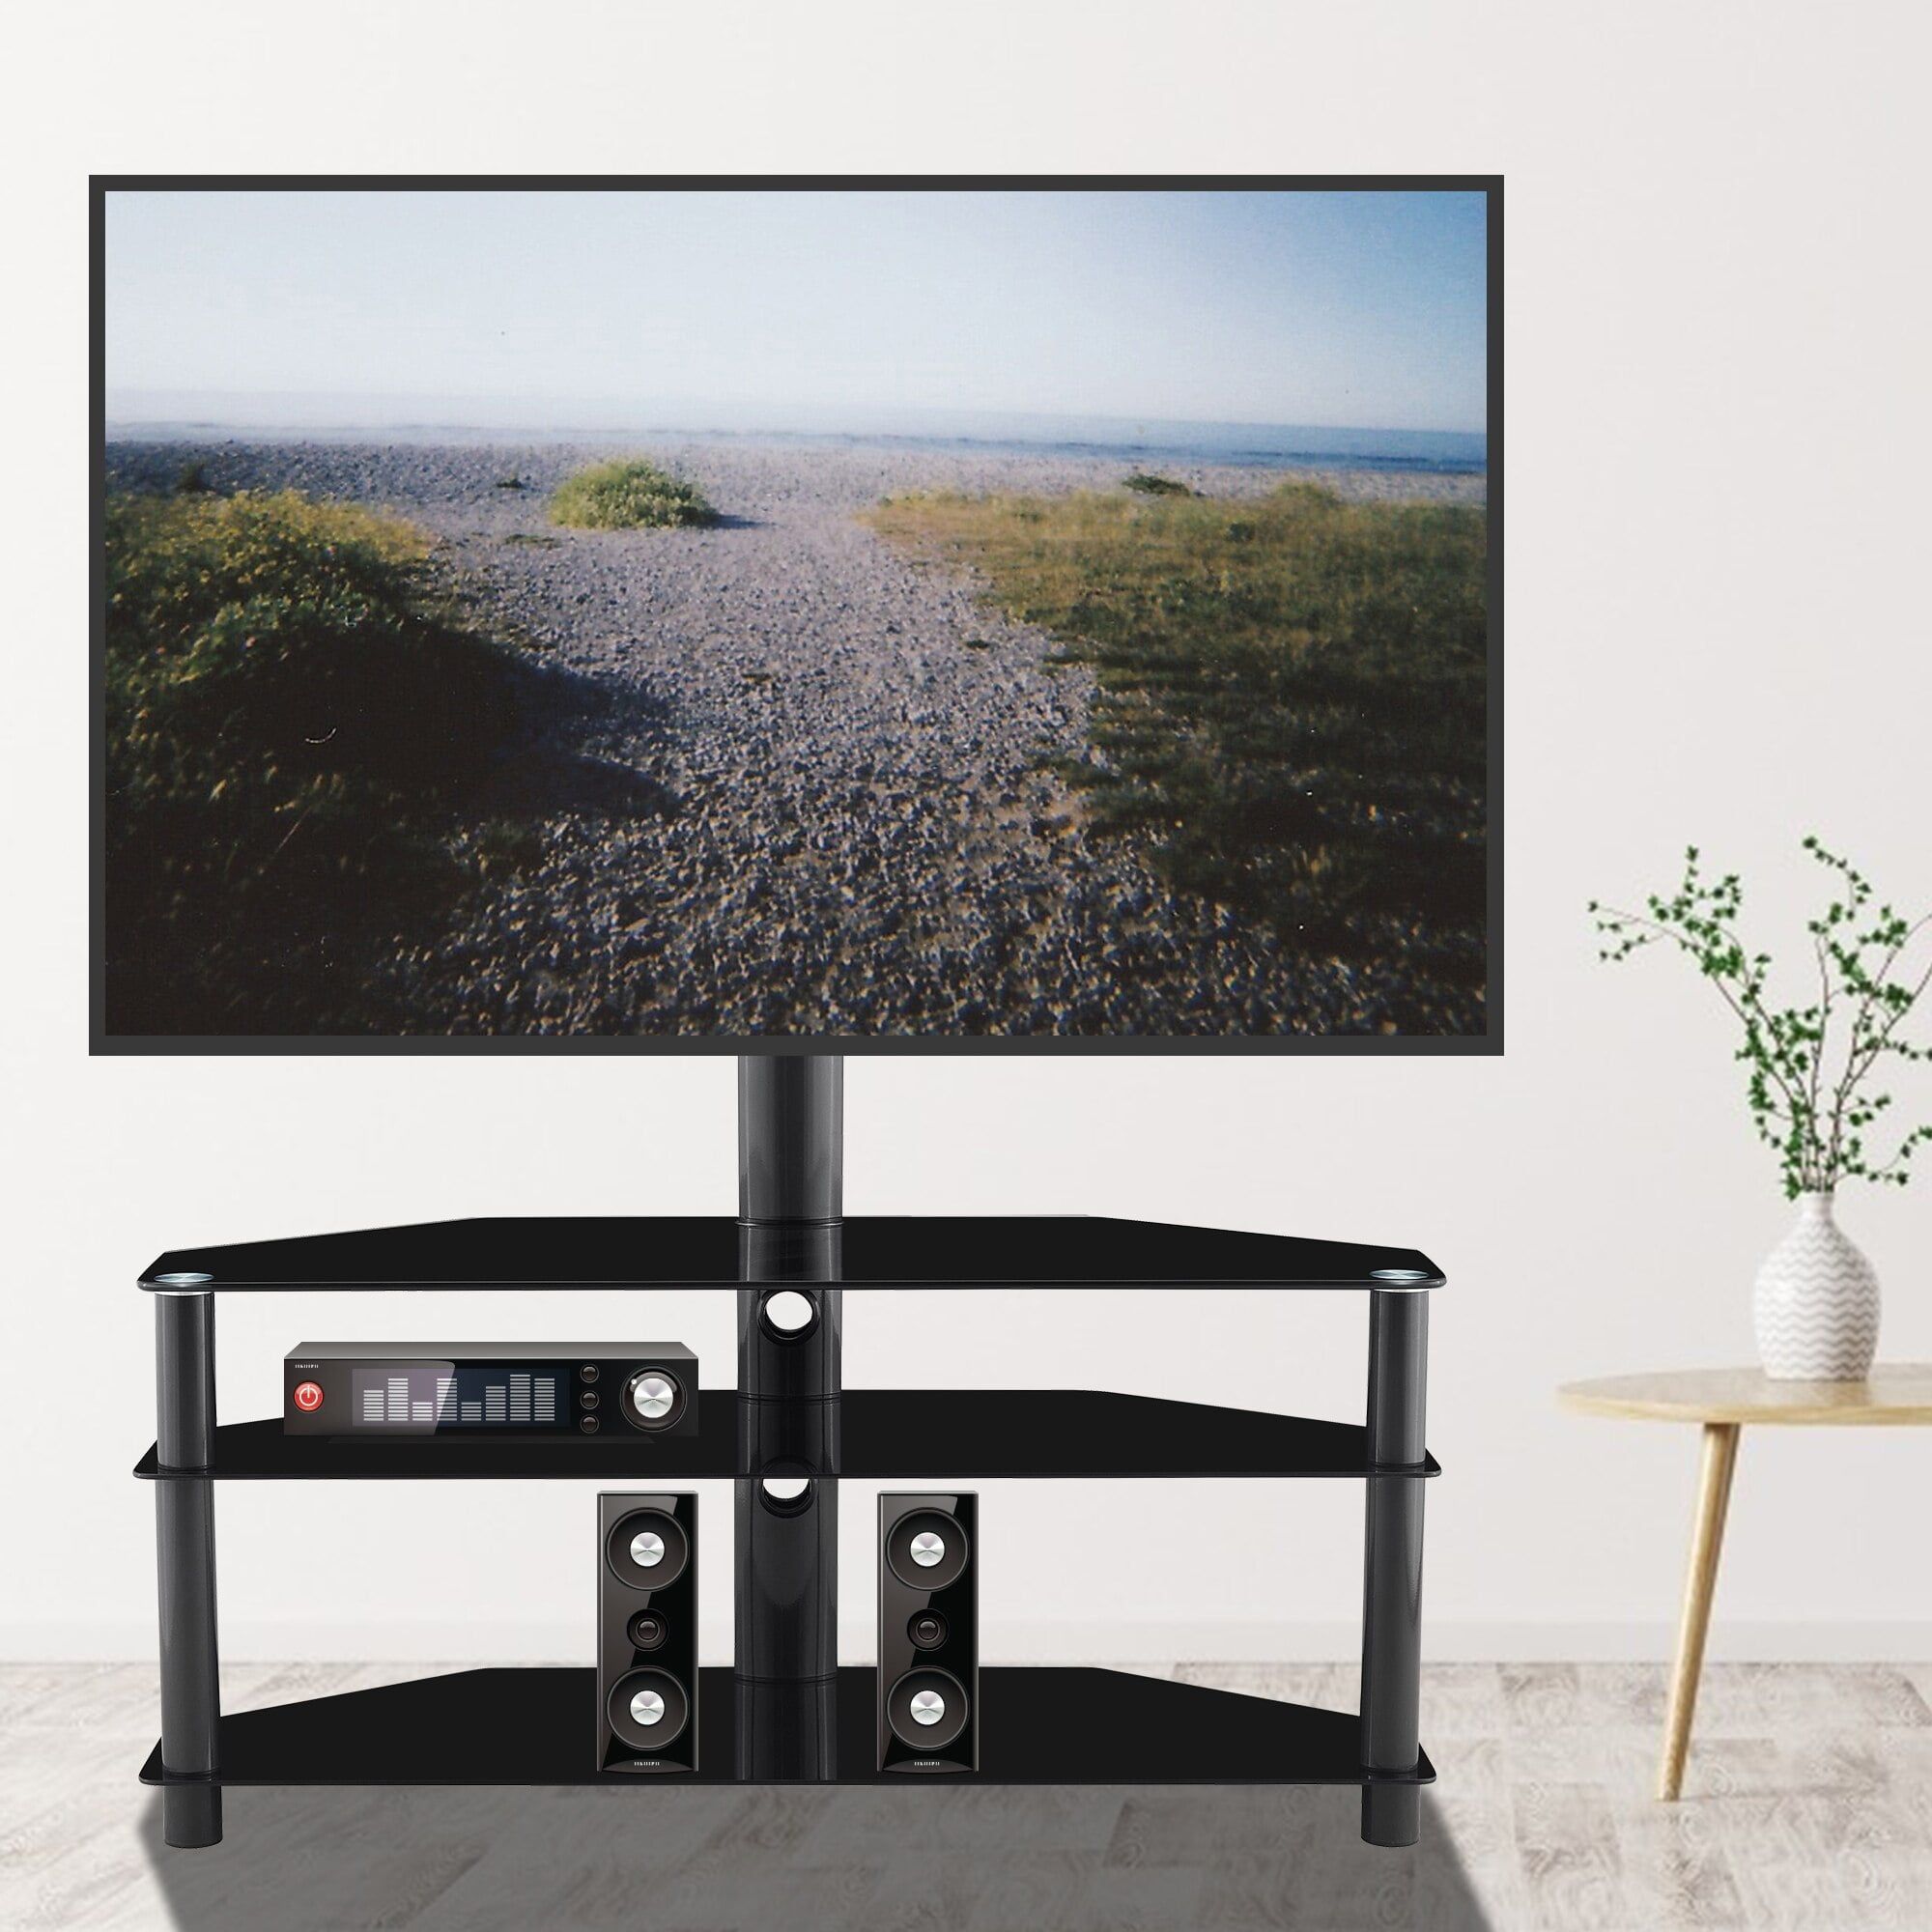 Mobile Tv Stand, Floor Tv Stand,vinsic Tv Mount With Mount For 32 In Universal Floor Tv Stands (View 19 of 20)